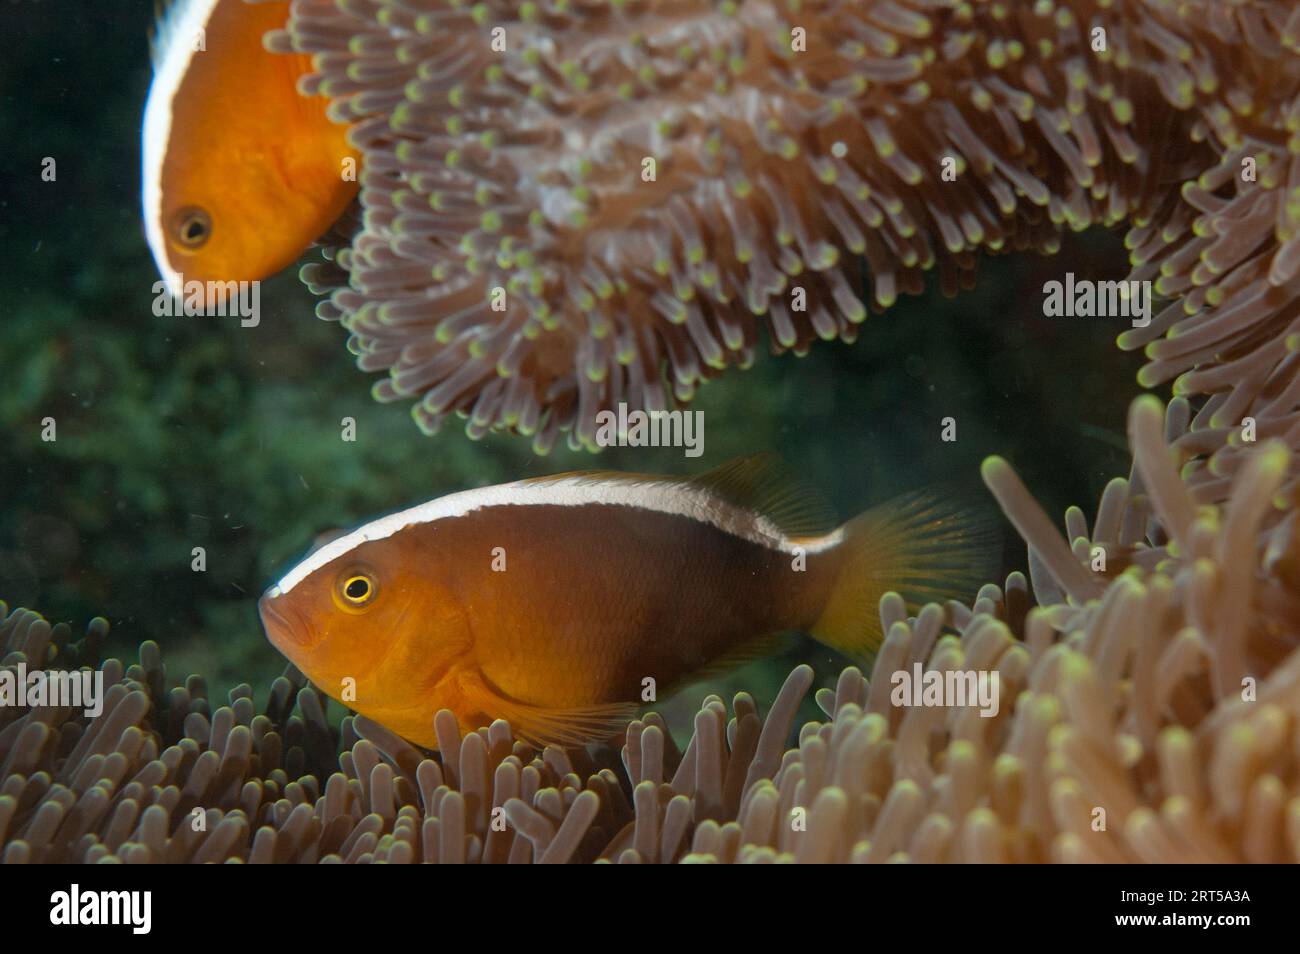 Pair of Orange Anemonefish, Amphiprion sandaracinos, in Magnificent Sea Anemone, Heteractis magnifica, Sea Grass dive site, Lembeh Straits, Sulawesi, Stock Photo